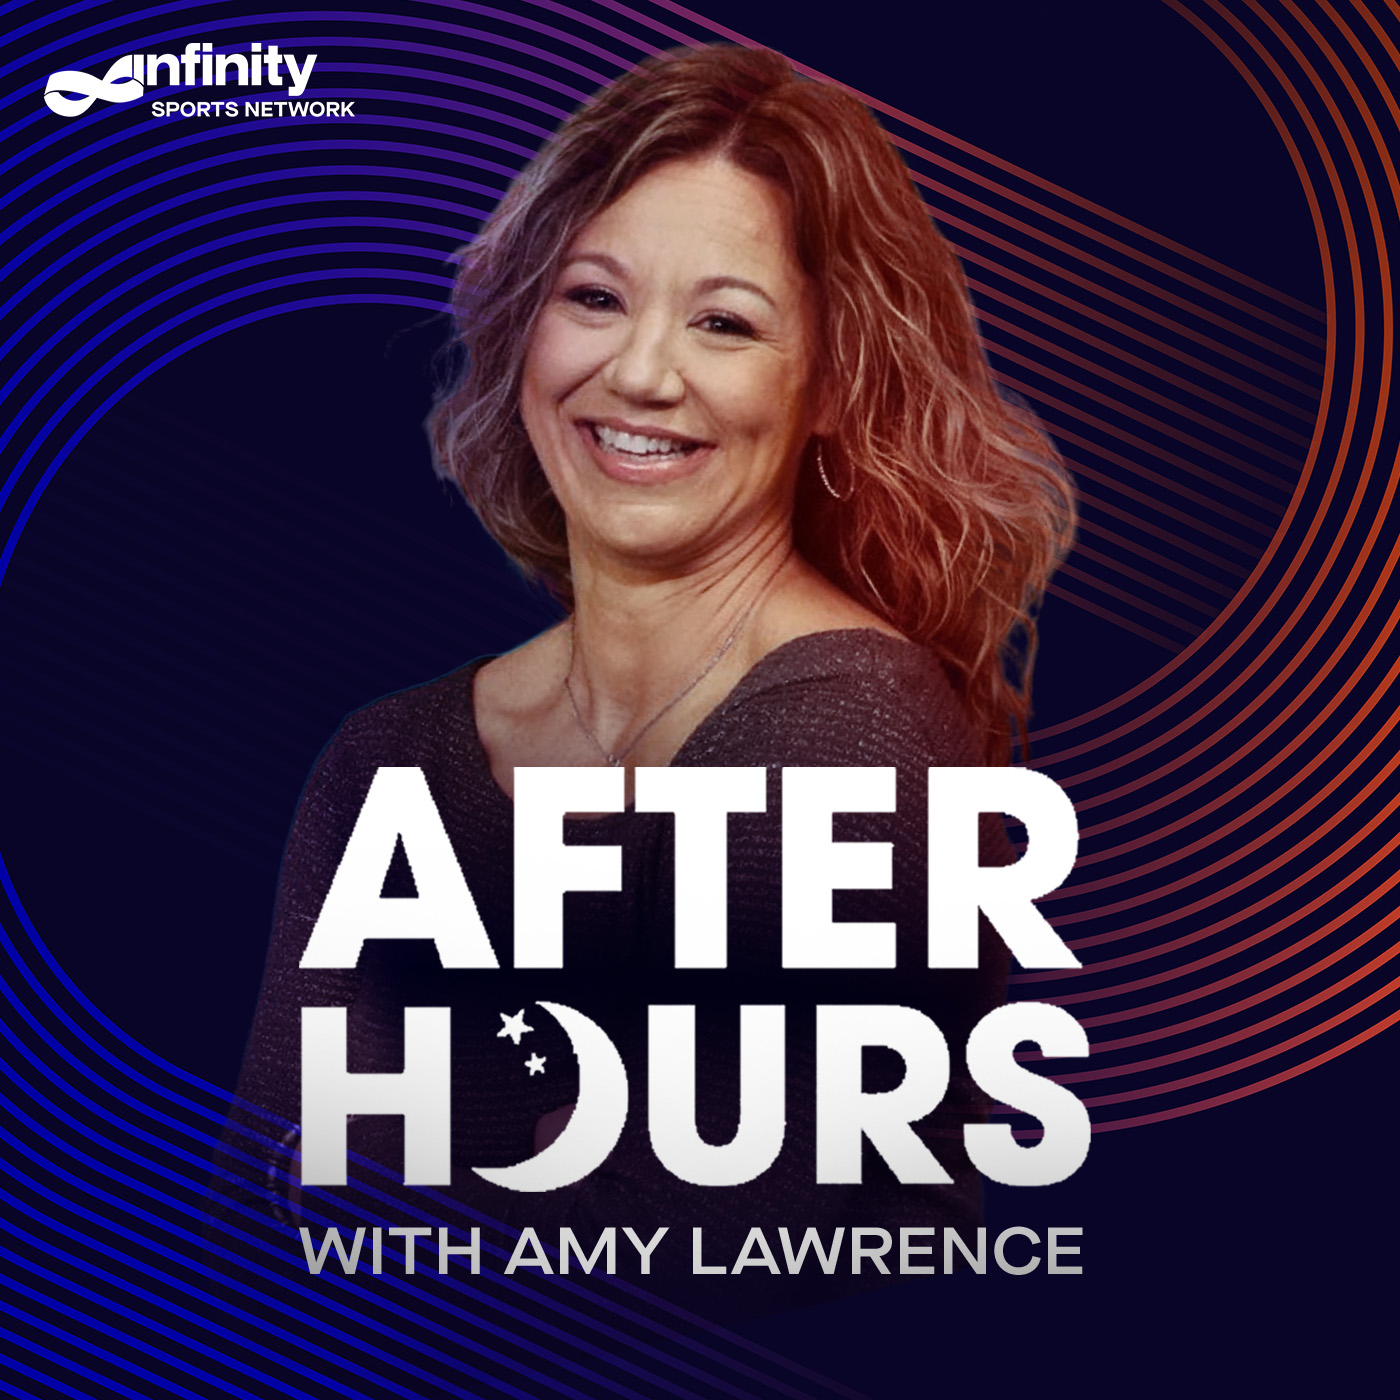 2-18-22 After Hours with Amy Lawrence PODCAST: Hour 4